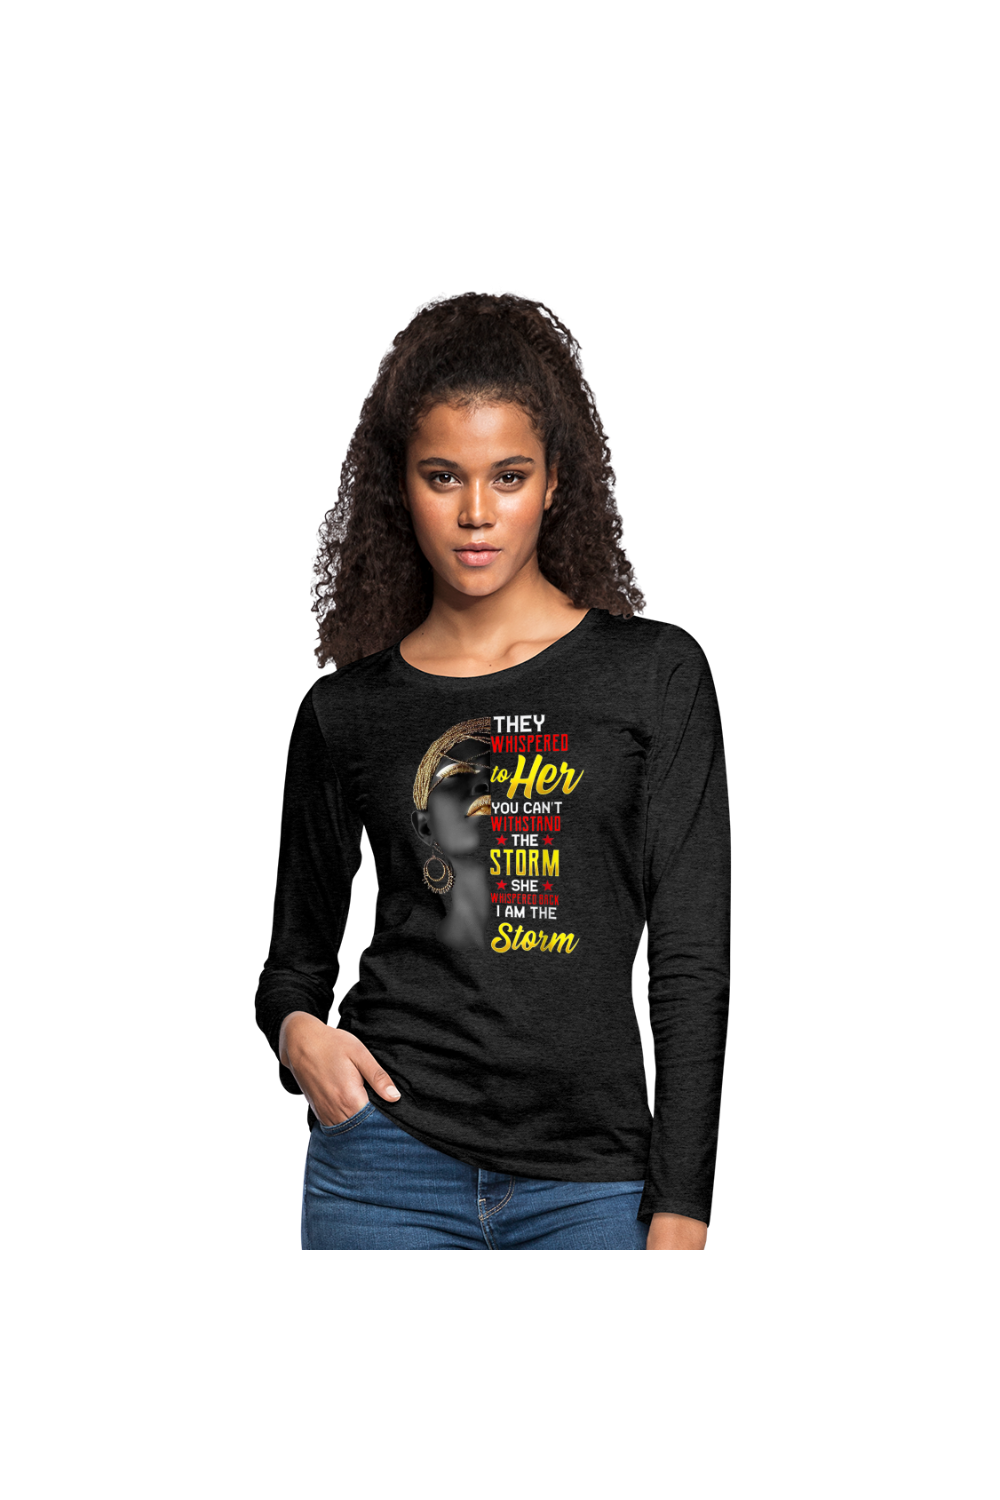 Women's They Whispered Long Sleeve T-Shirt - NicholesGifts